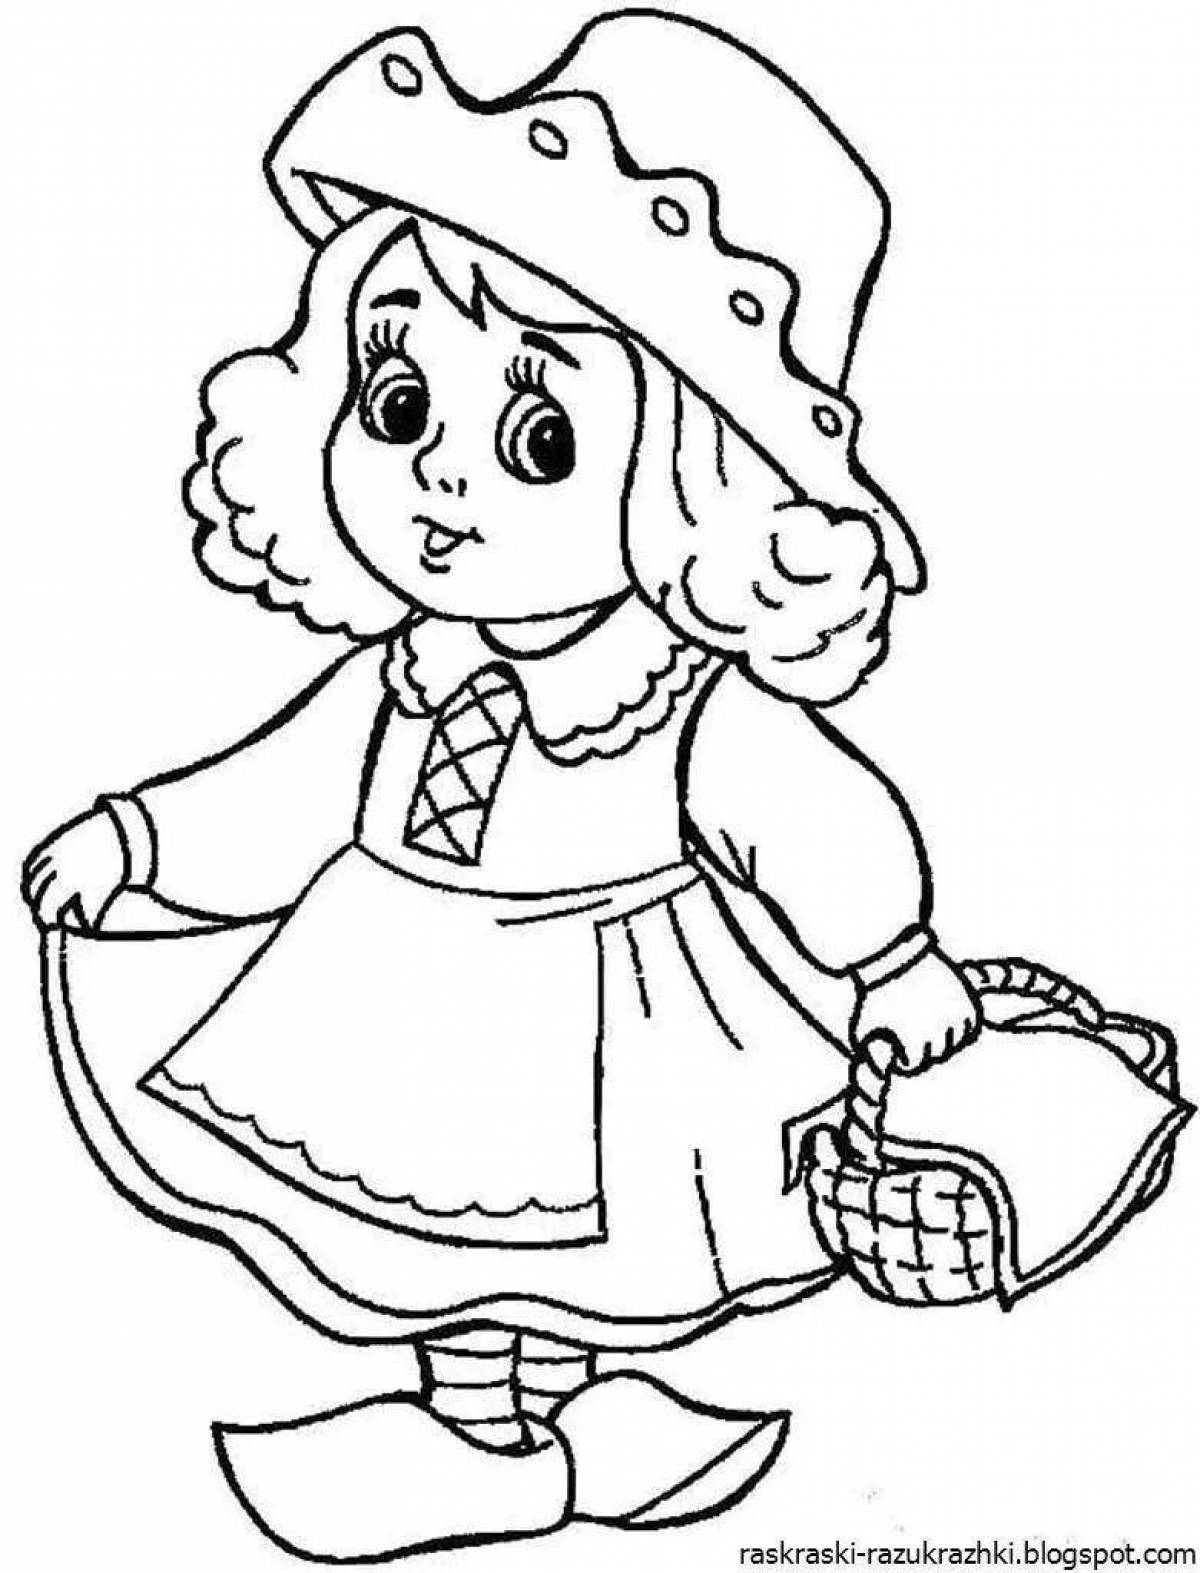 Great fairy tale characters coloring book for kids